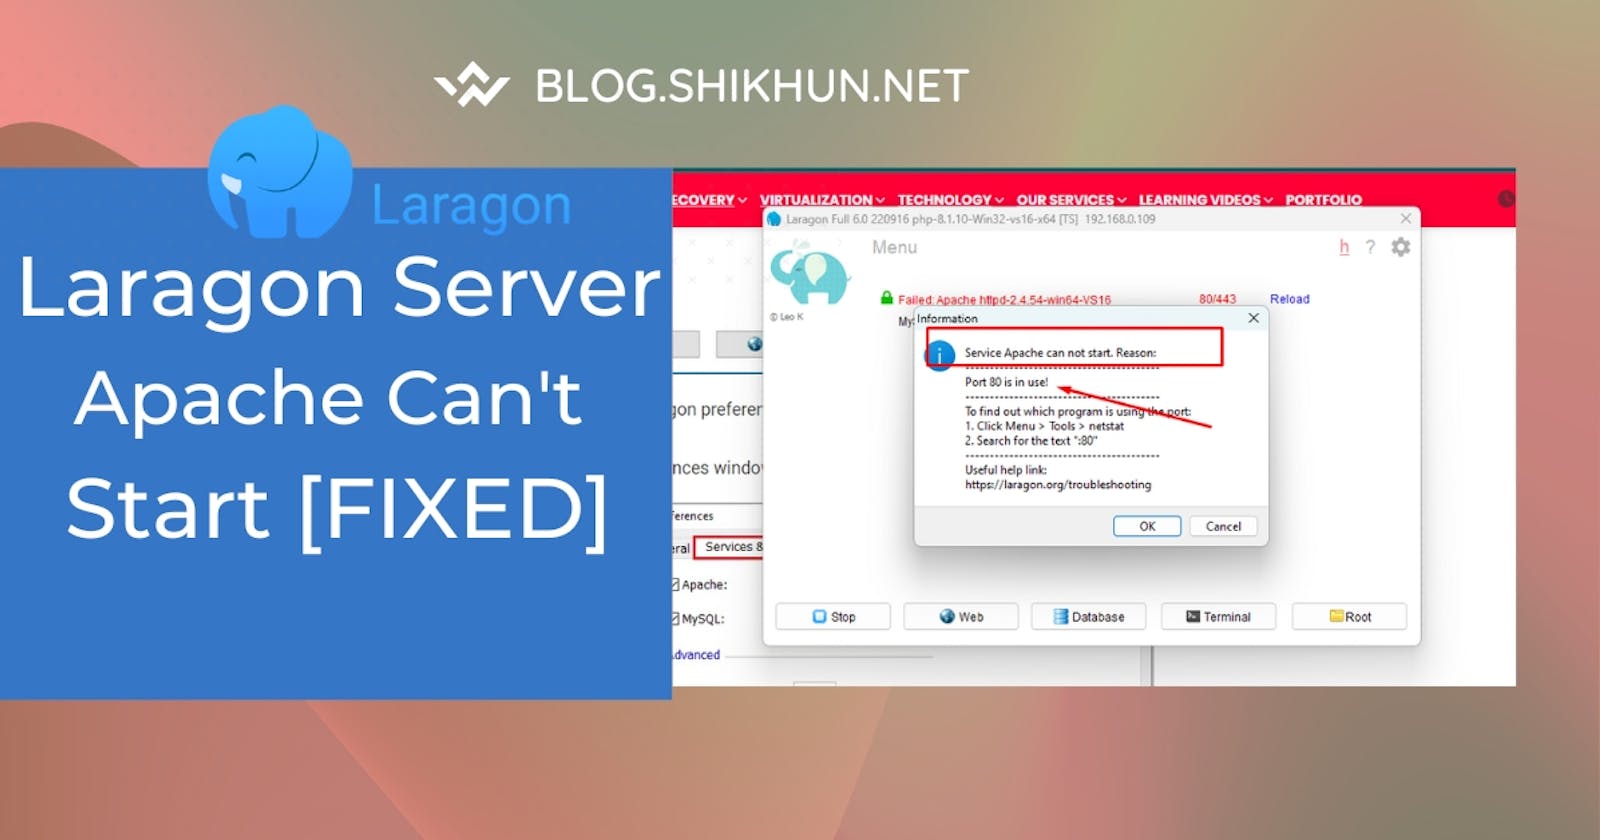 How to fix "Server Apache Can't Start" issues in Laragon